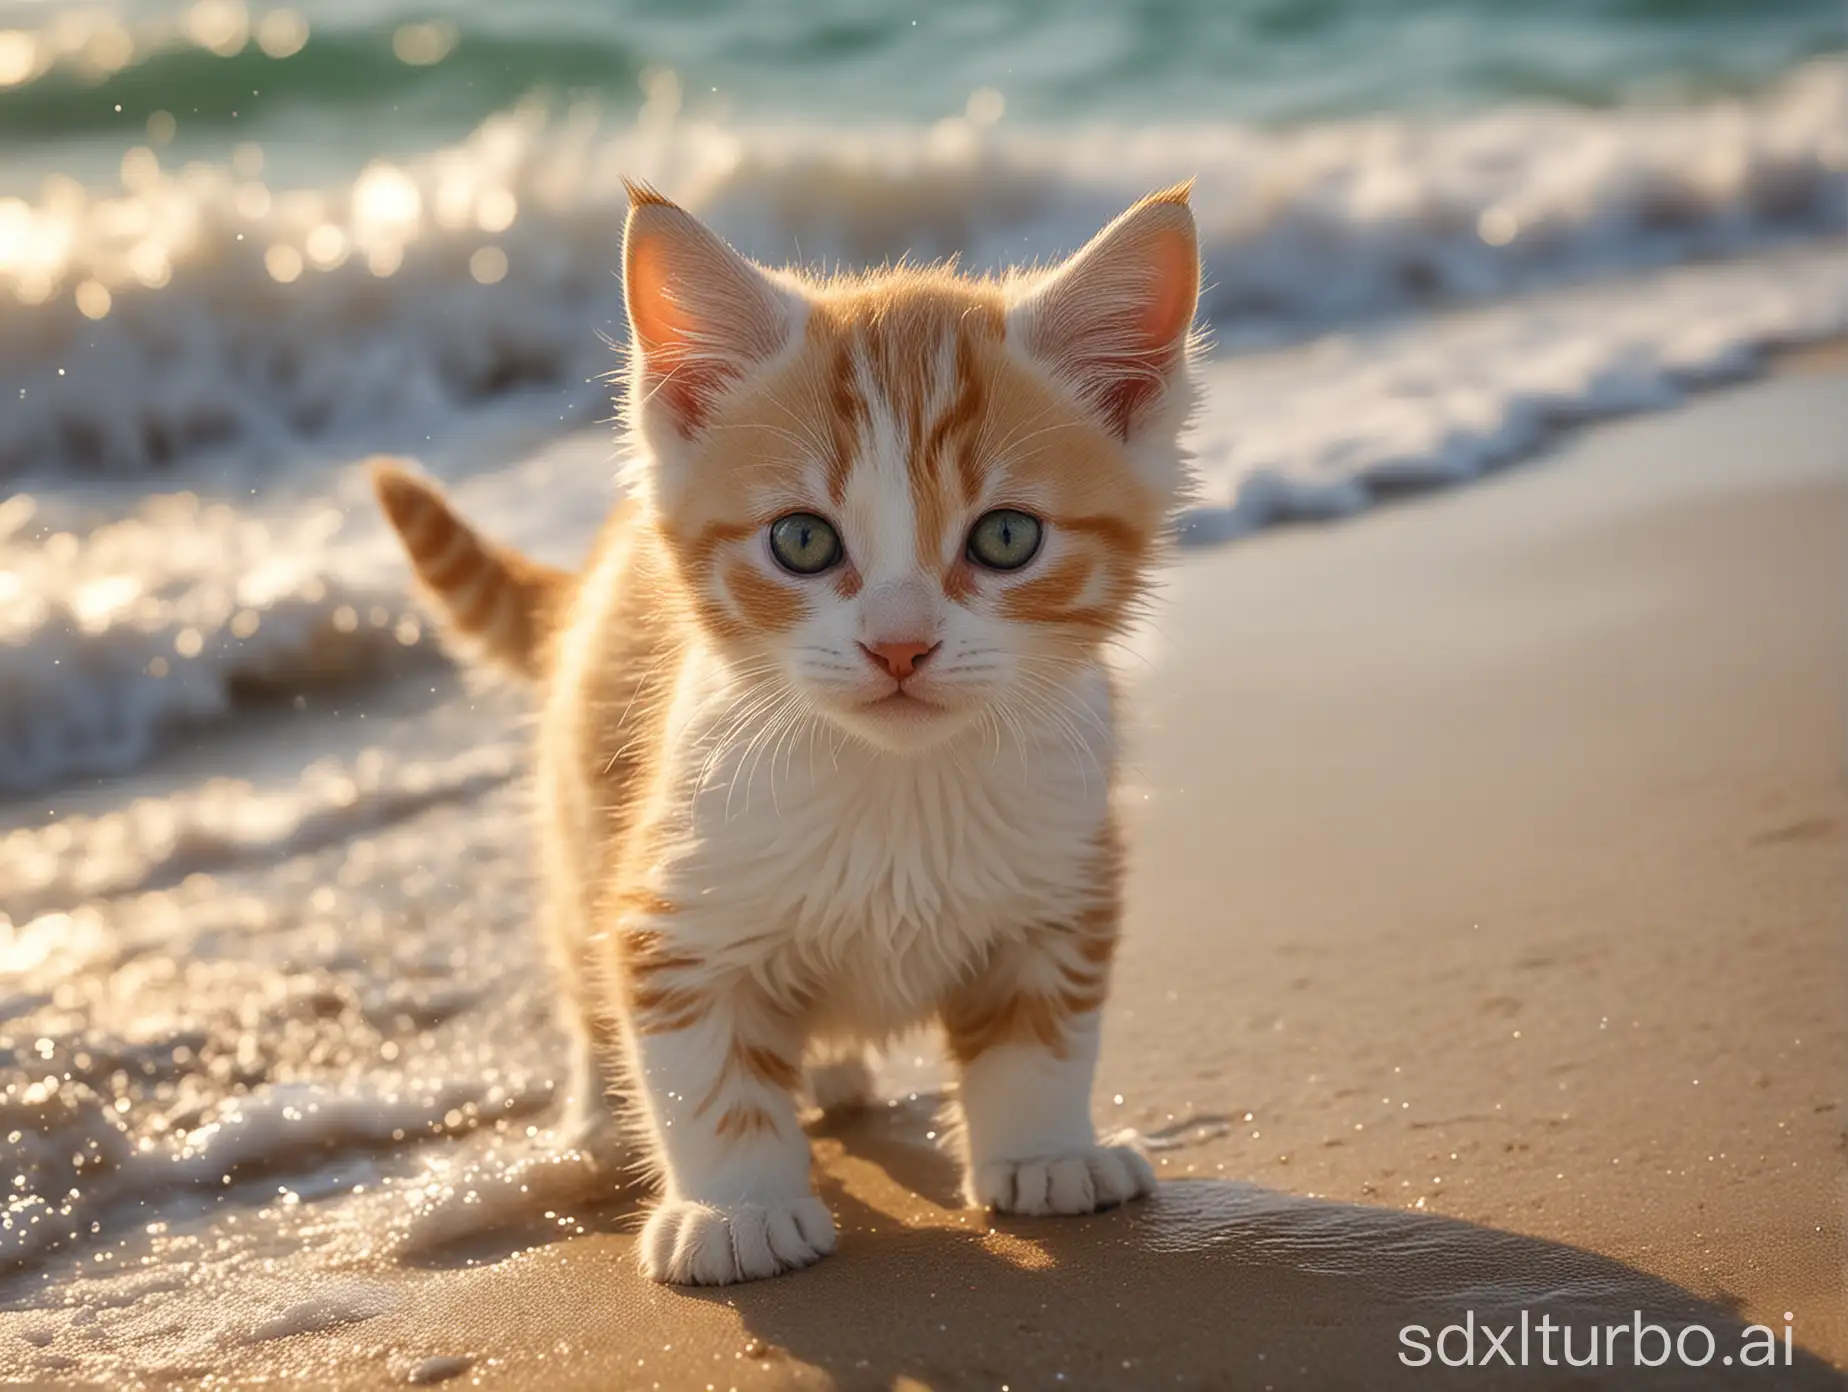 On the boundless seaside, the waves roll and the sea breeze blows. A brightly colored kitten stood on the beach, its agile eyes gazing at the sea. Suddenly, the kitten vigorously kicked its hind legs and jumped up lightly. Its small body curved in the air before landing steadily on the beach. It jumps again, as if playing with the sea, with the sunlight shining on it, creating a vibrant scene.